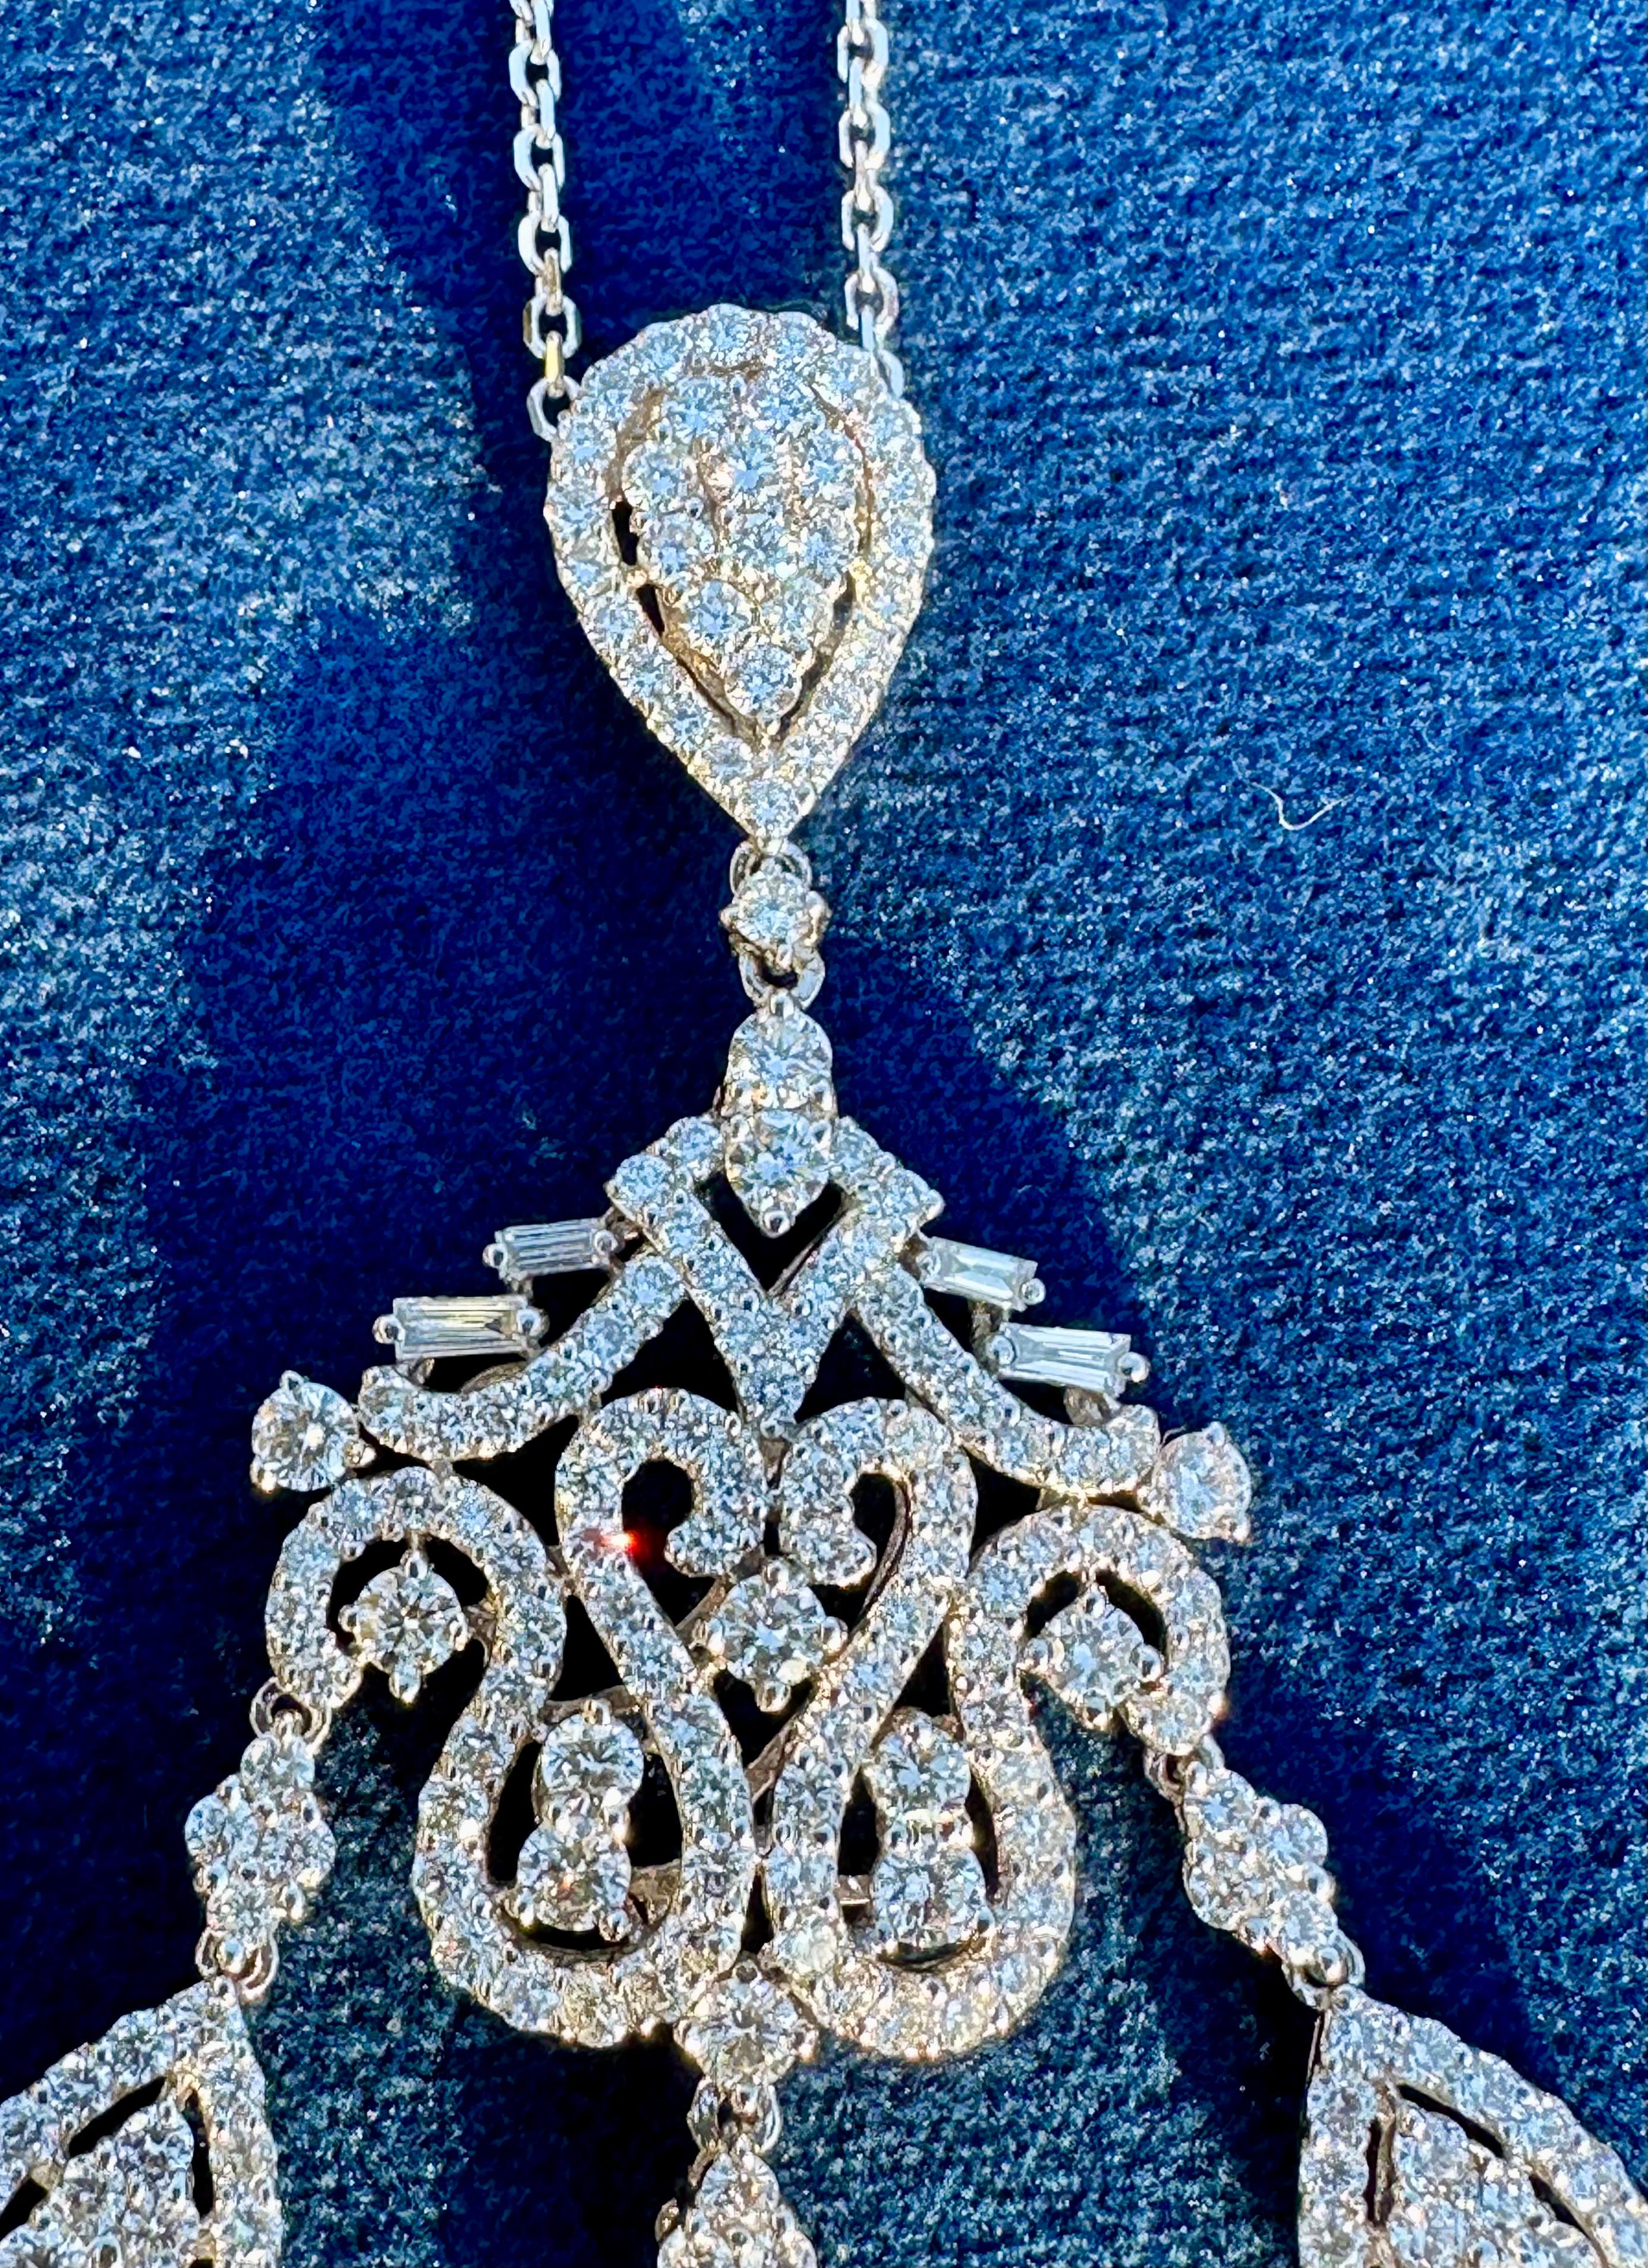 Exquisite 18 Karat White Gold 9.76 Carat Diamond Chandelier Pendant Necklace  In Excellent Condition For Sale In Tustin, CA